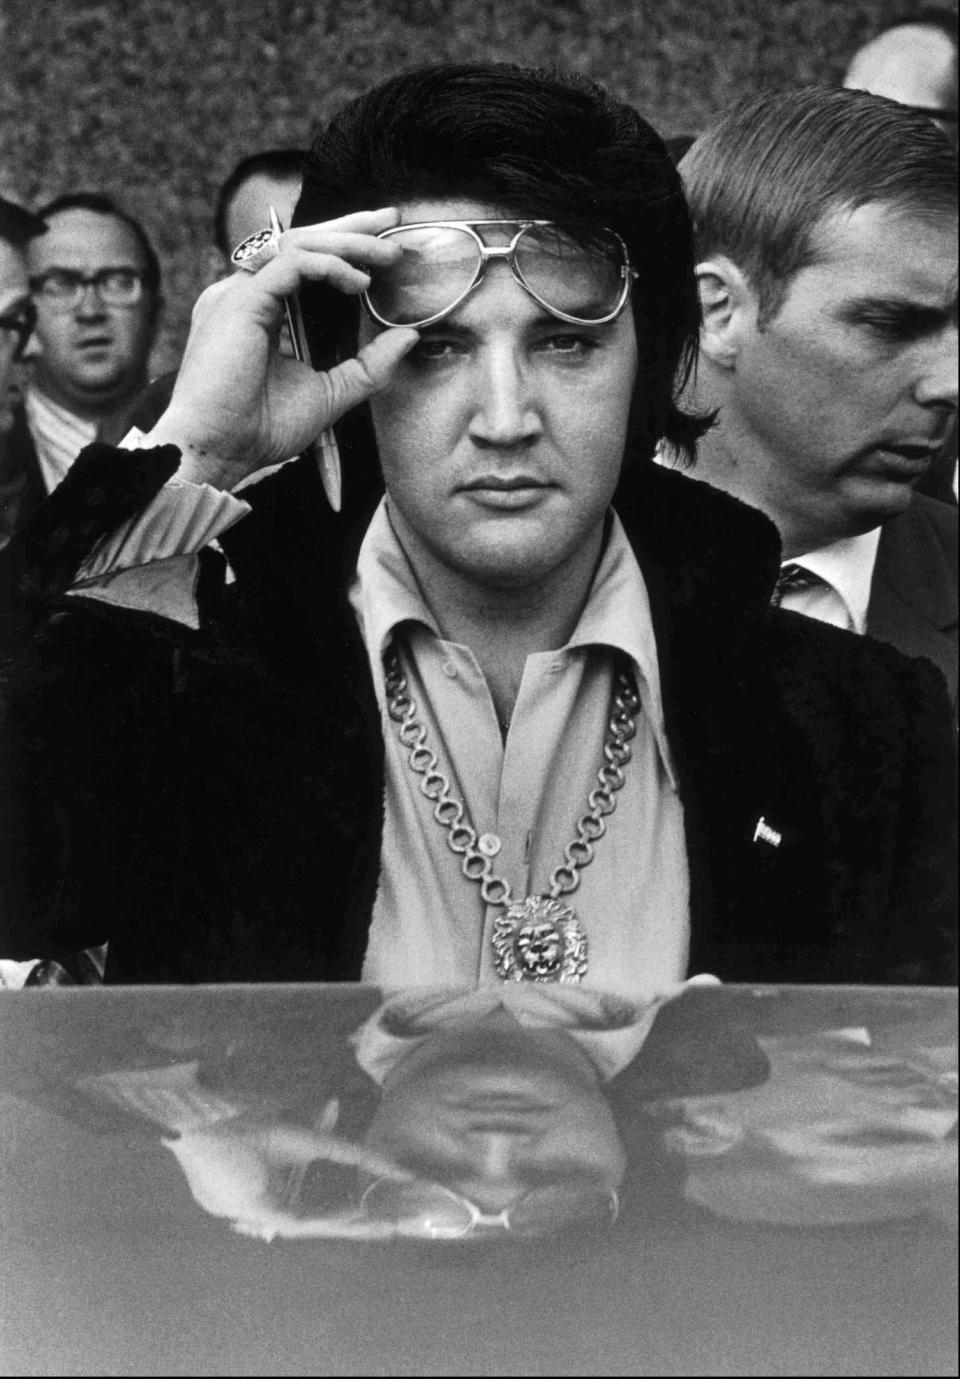 Jan. 16, 1971: Elvis Presley is reflected in the roof of his automobile as he looks into the camera after attending a luncheon at what was then the Holiday Inn Rivermont. Elvis would have turned 88 on Jan. 8 this year.